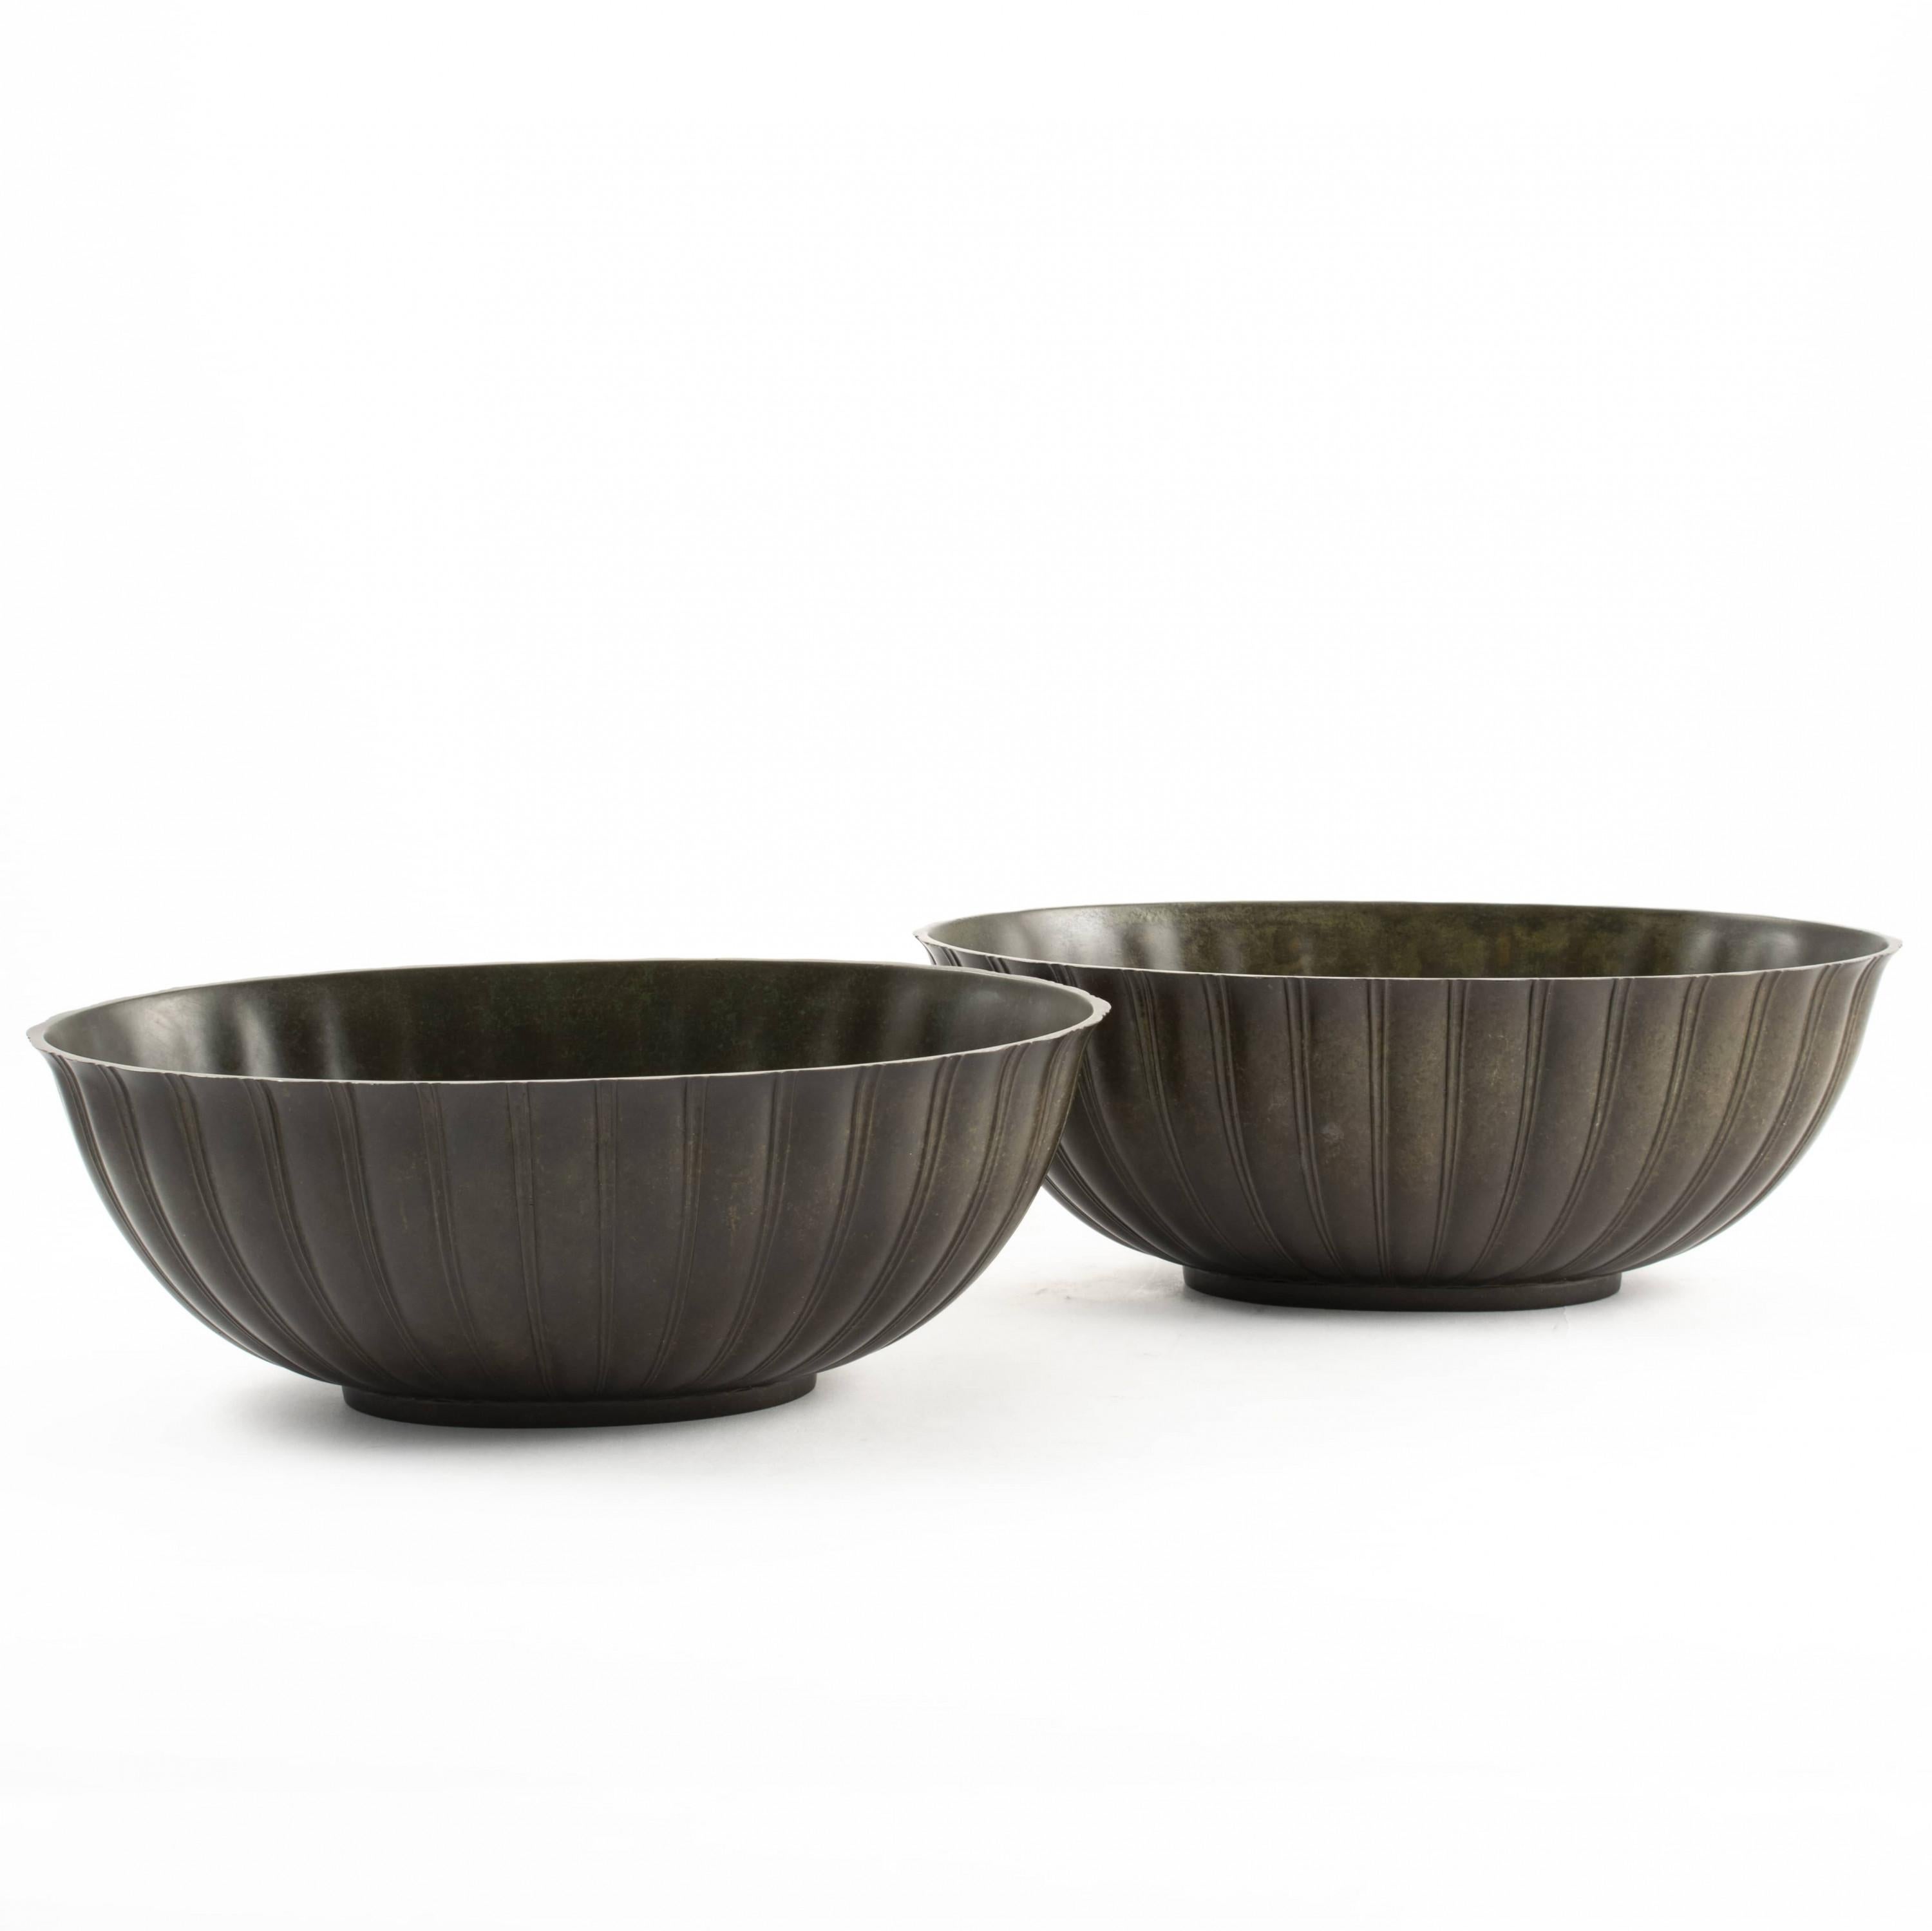 Pair of art deco bowls / jardinières designed by Just Andersen.
Made in Disko metal, a metal specifically invented by Just Andersen by combining lead and antimony, with a dark patina.
Stamped and numbered JUST 1752 to base.

Denmark, circa